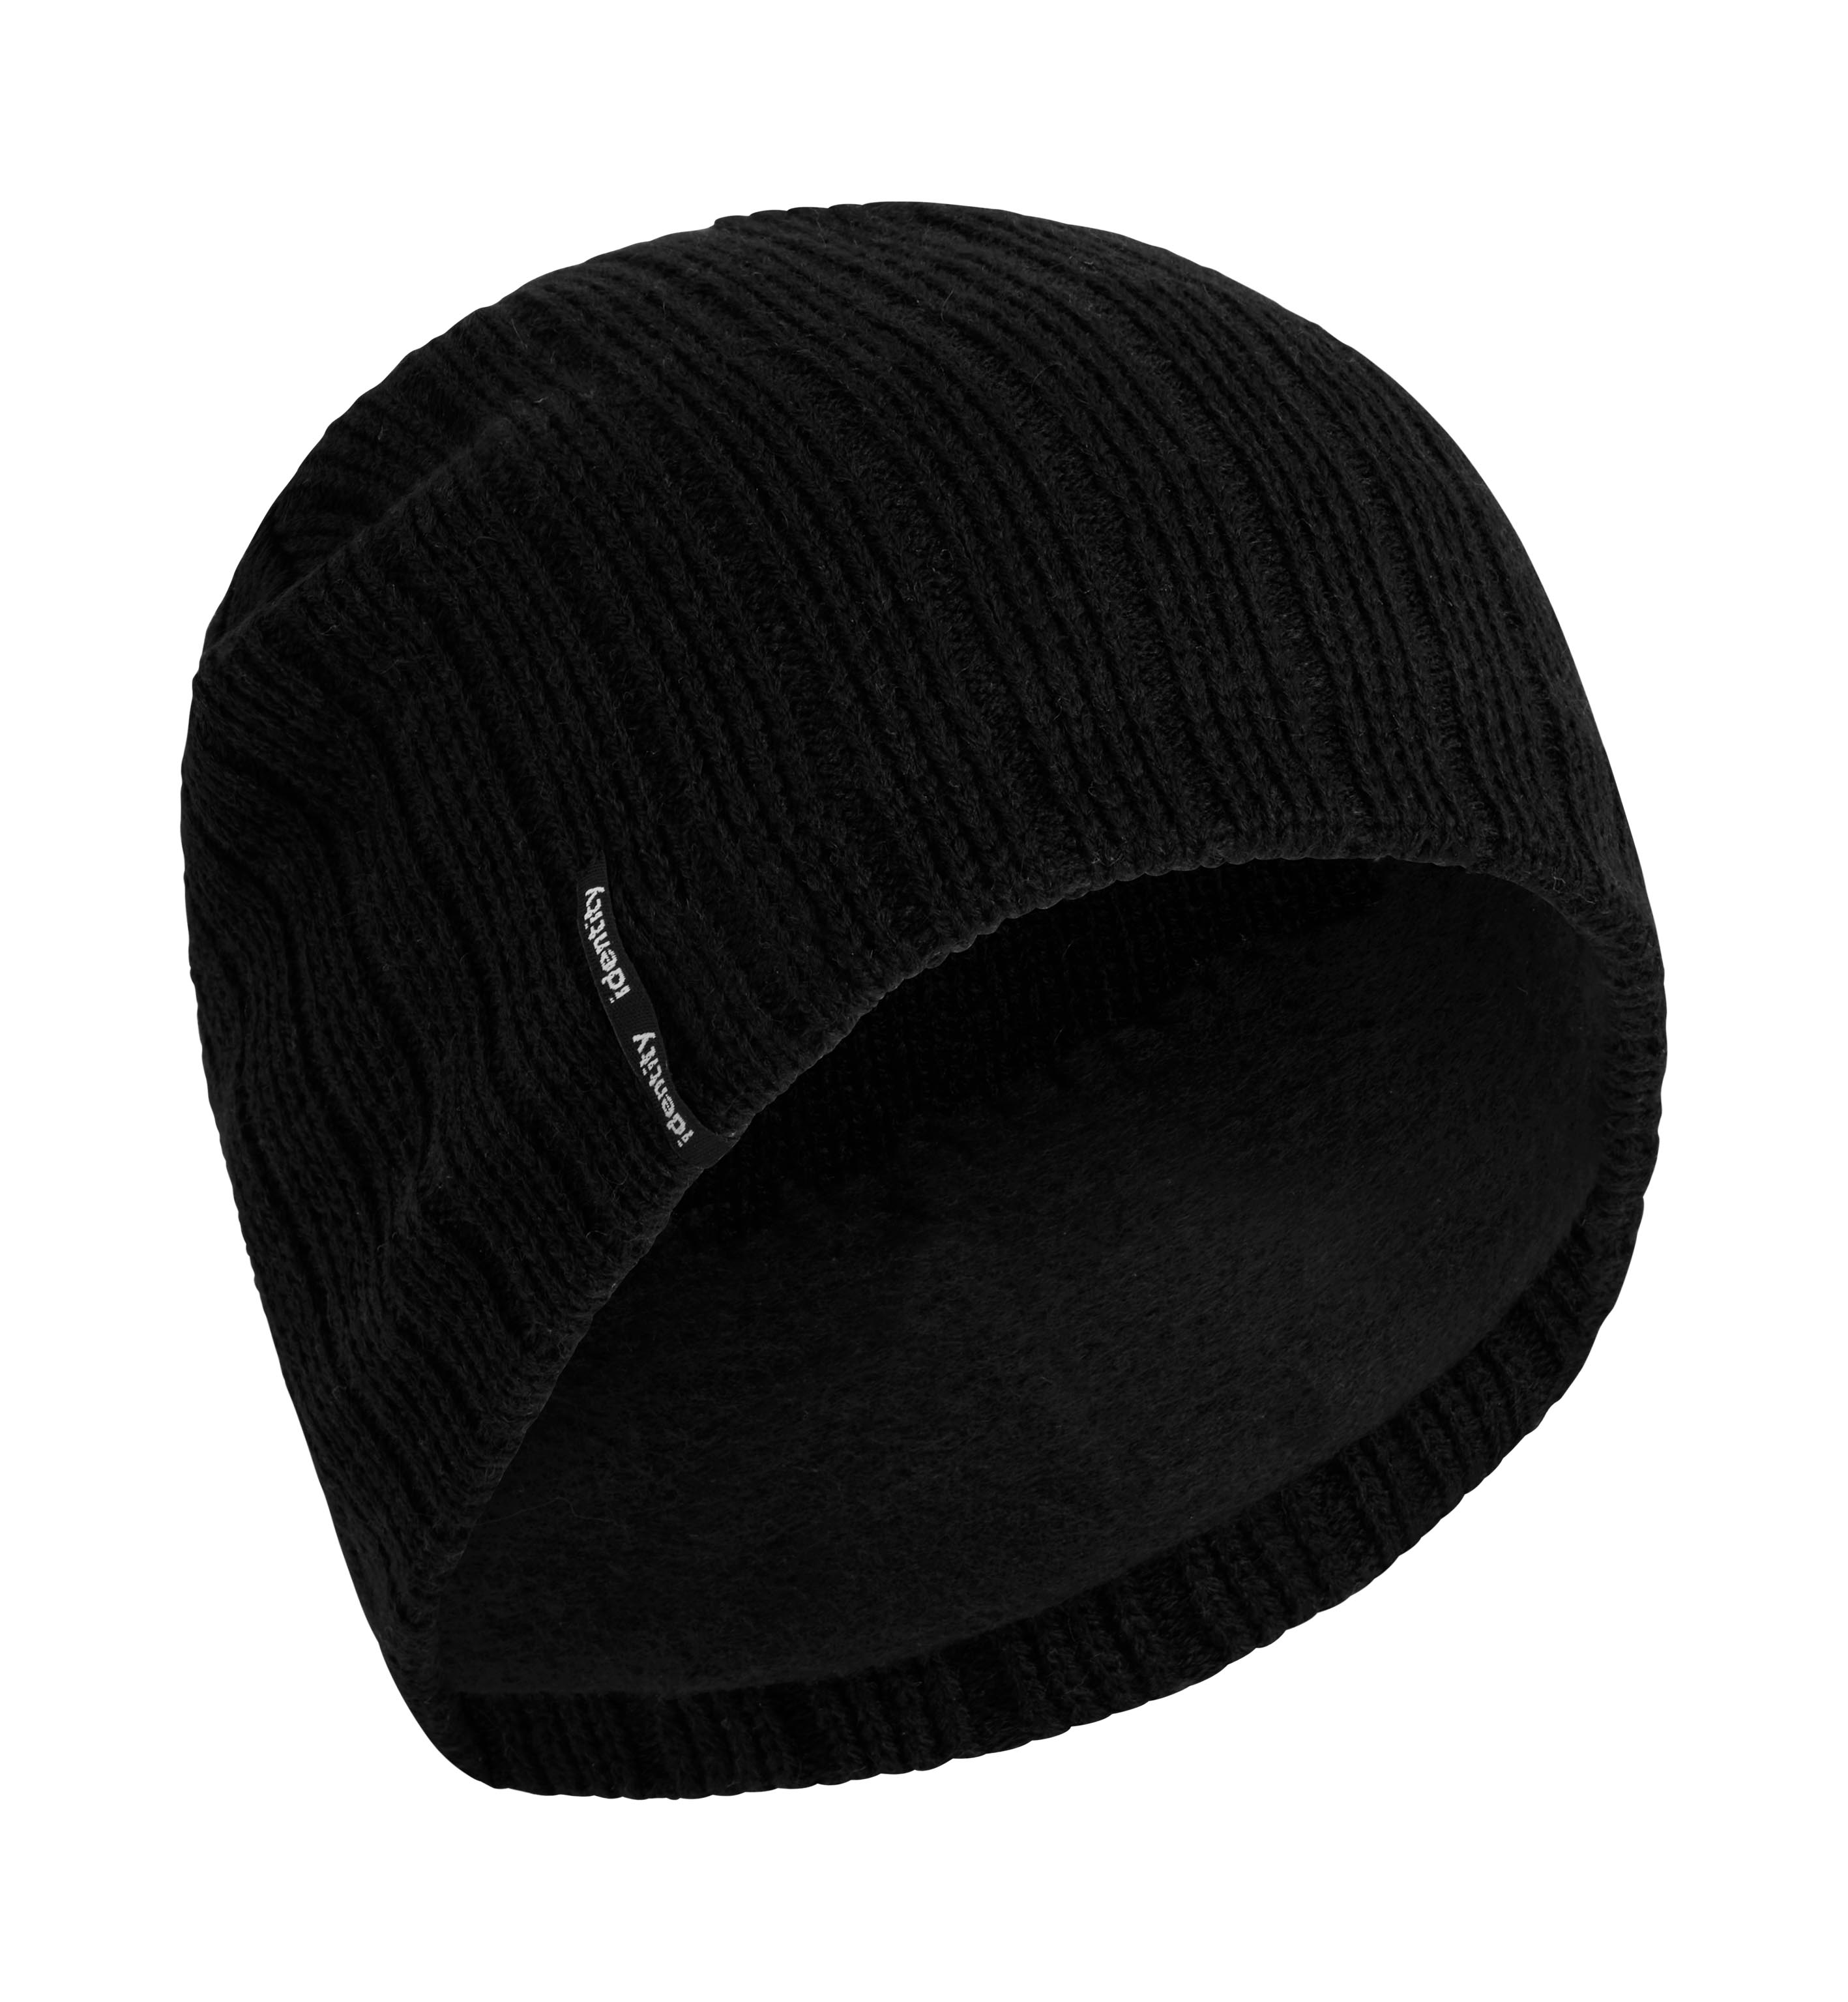 Knitted hat | lining